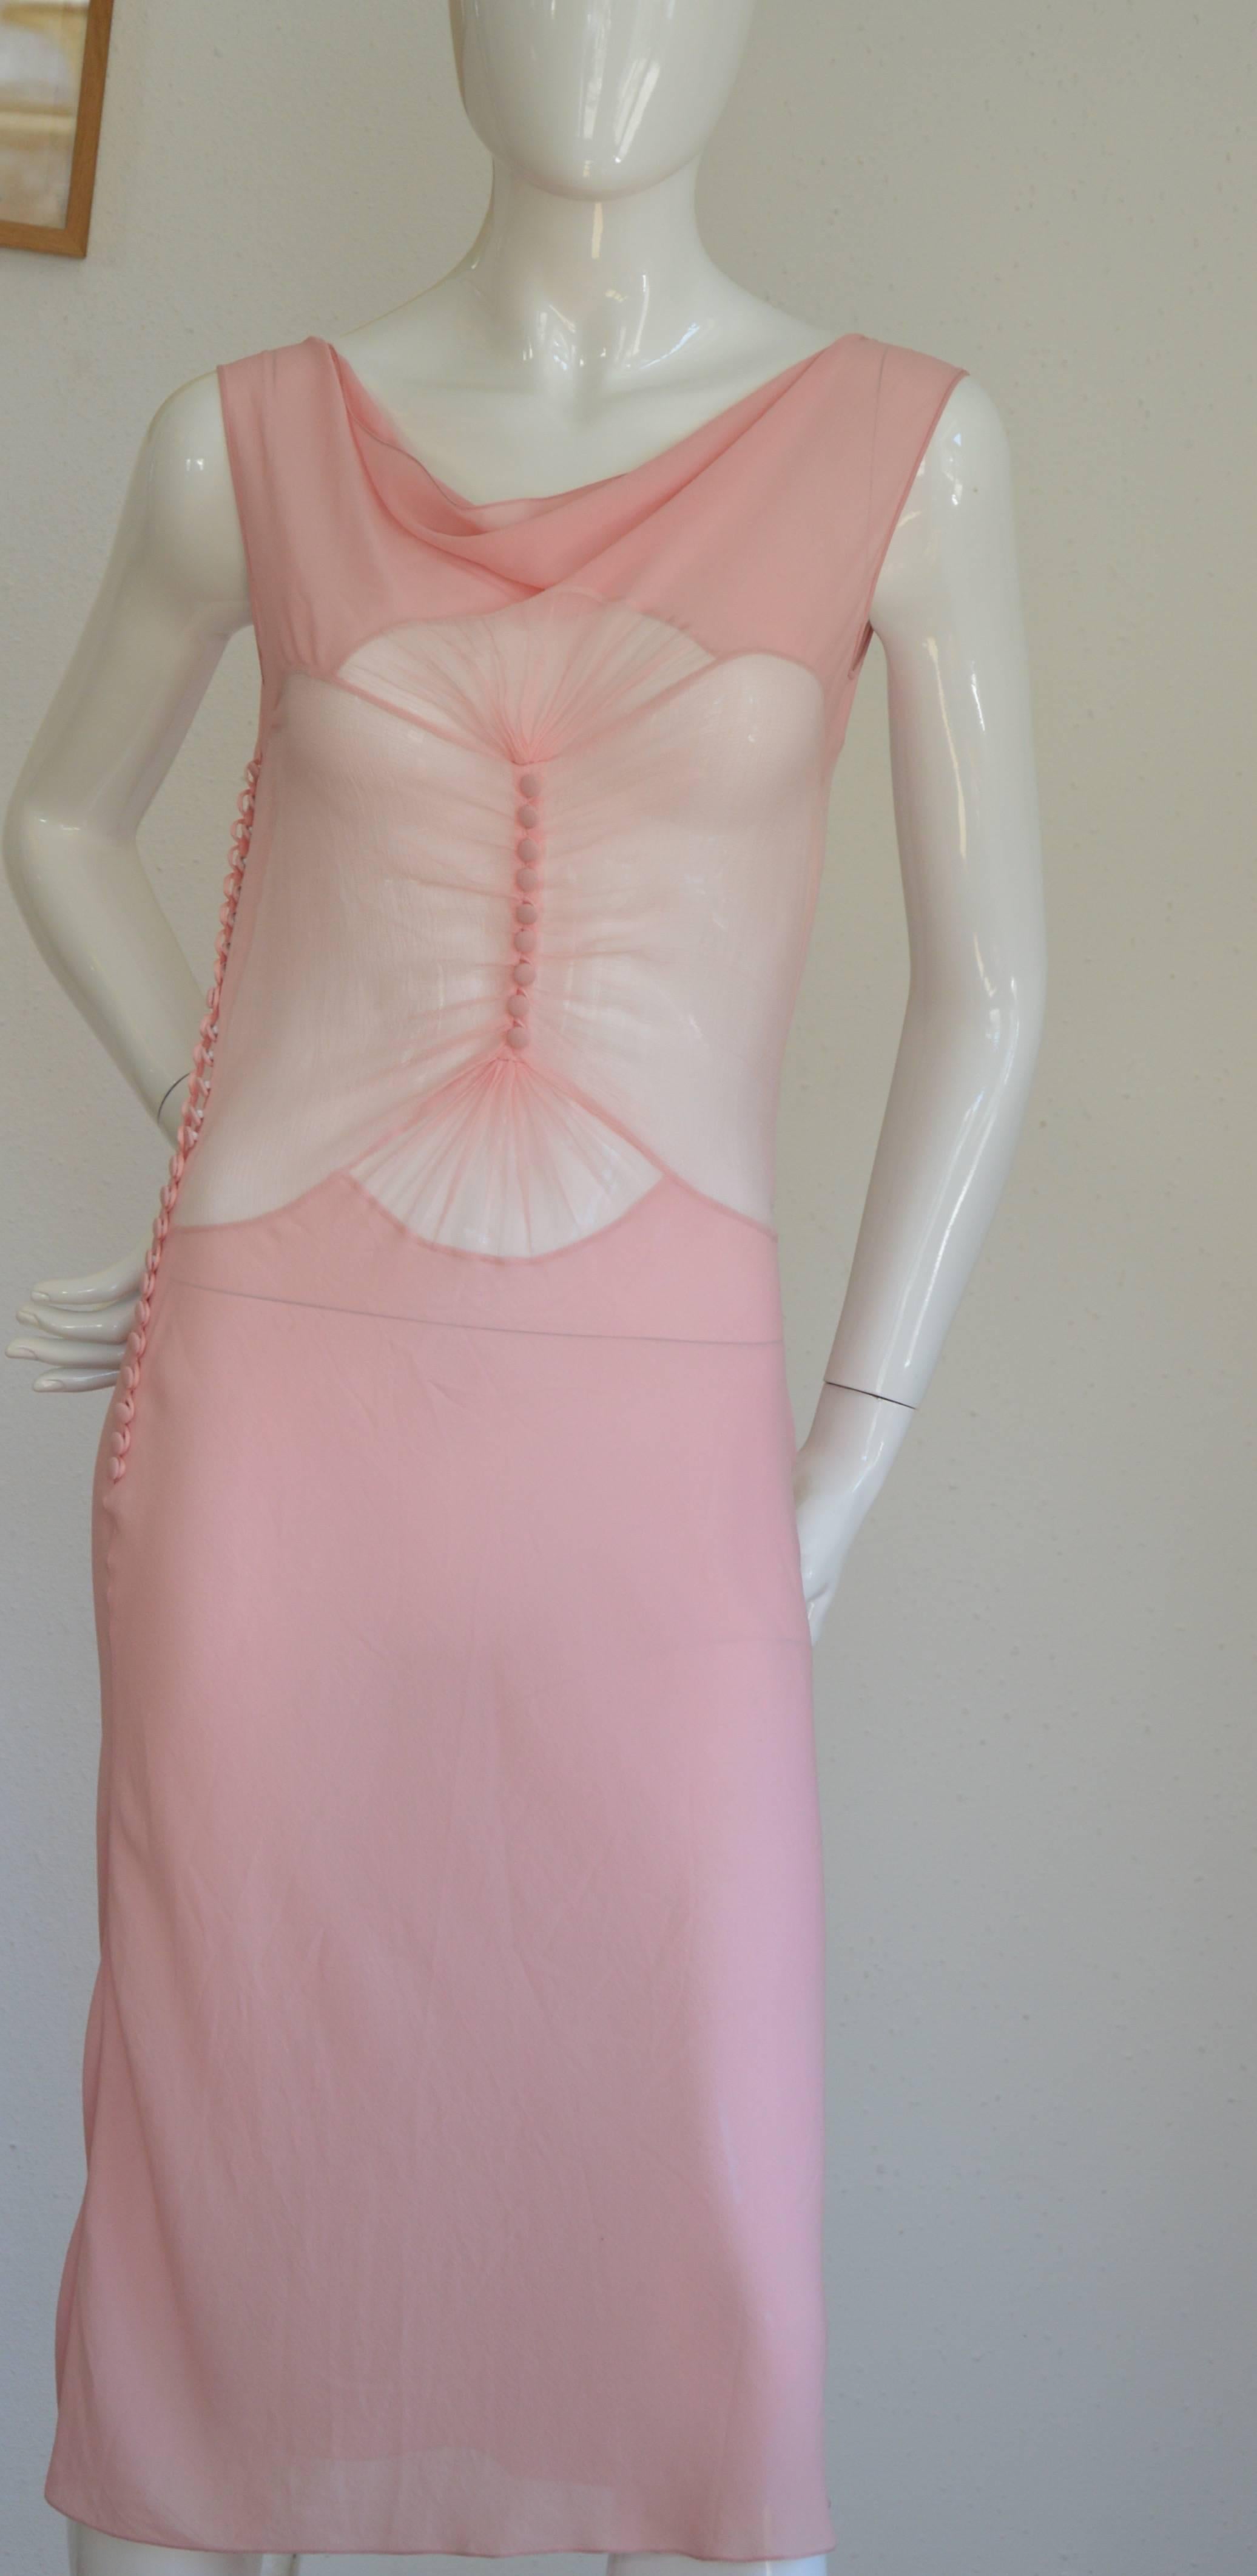 This Guy Laroche "Collection"  flesh color with a pinky touch sheer dress is delicate but with an elaborate sewing construction as a result a flawless sophistication, the dress comes with a tank top to wear as an under dress (numbered on